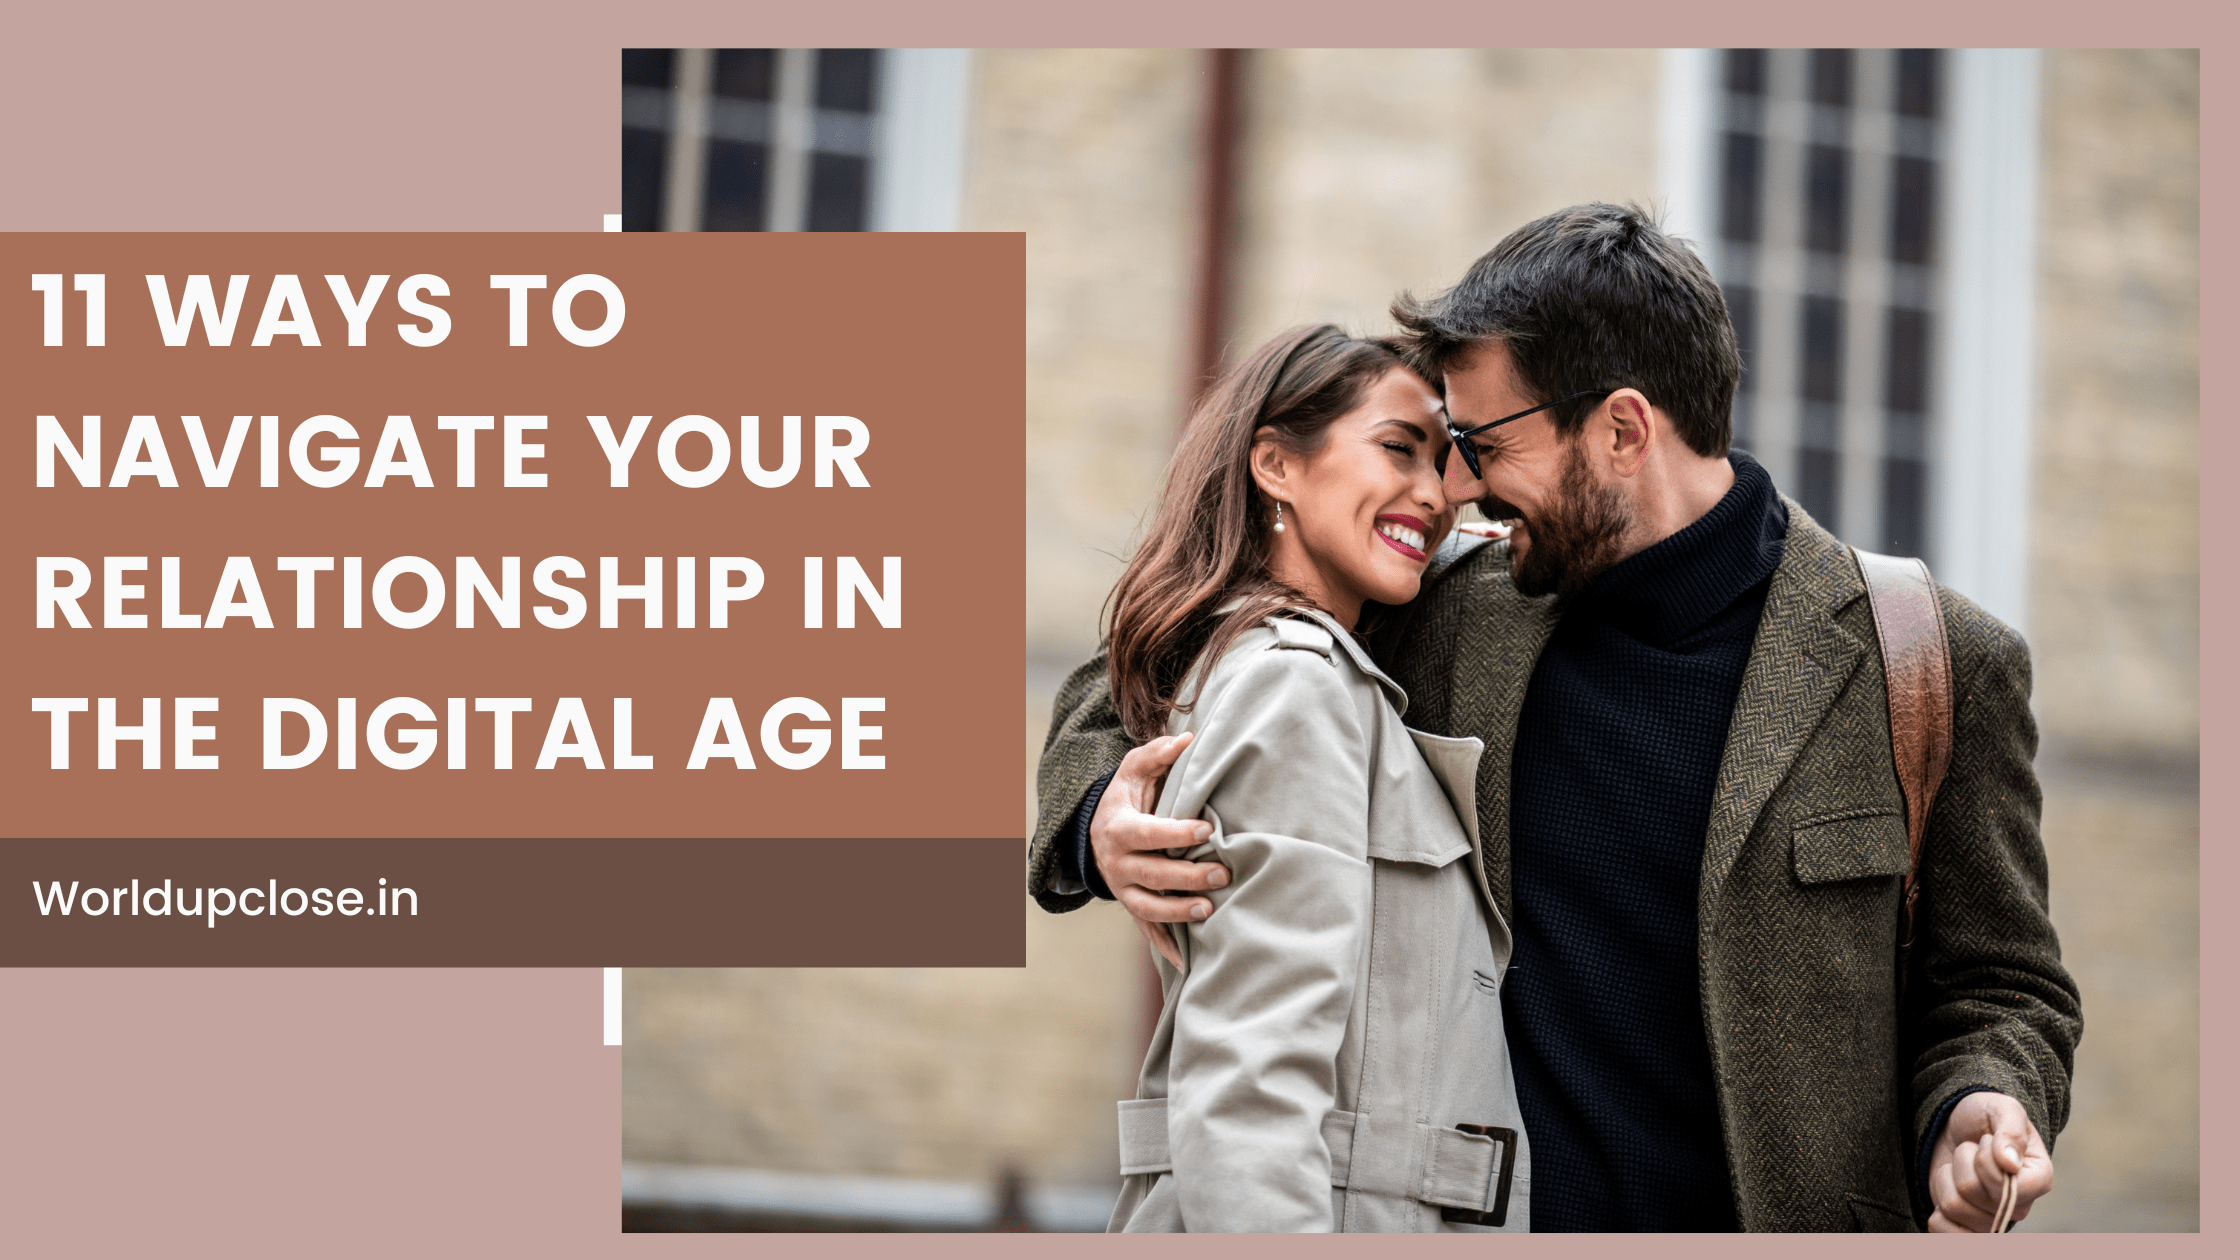 11 Ways to navigate your relationship in the digital age 3